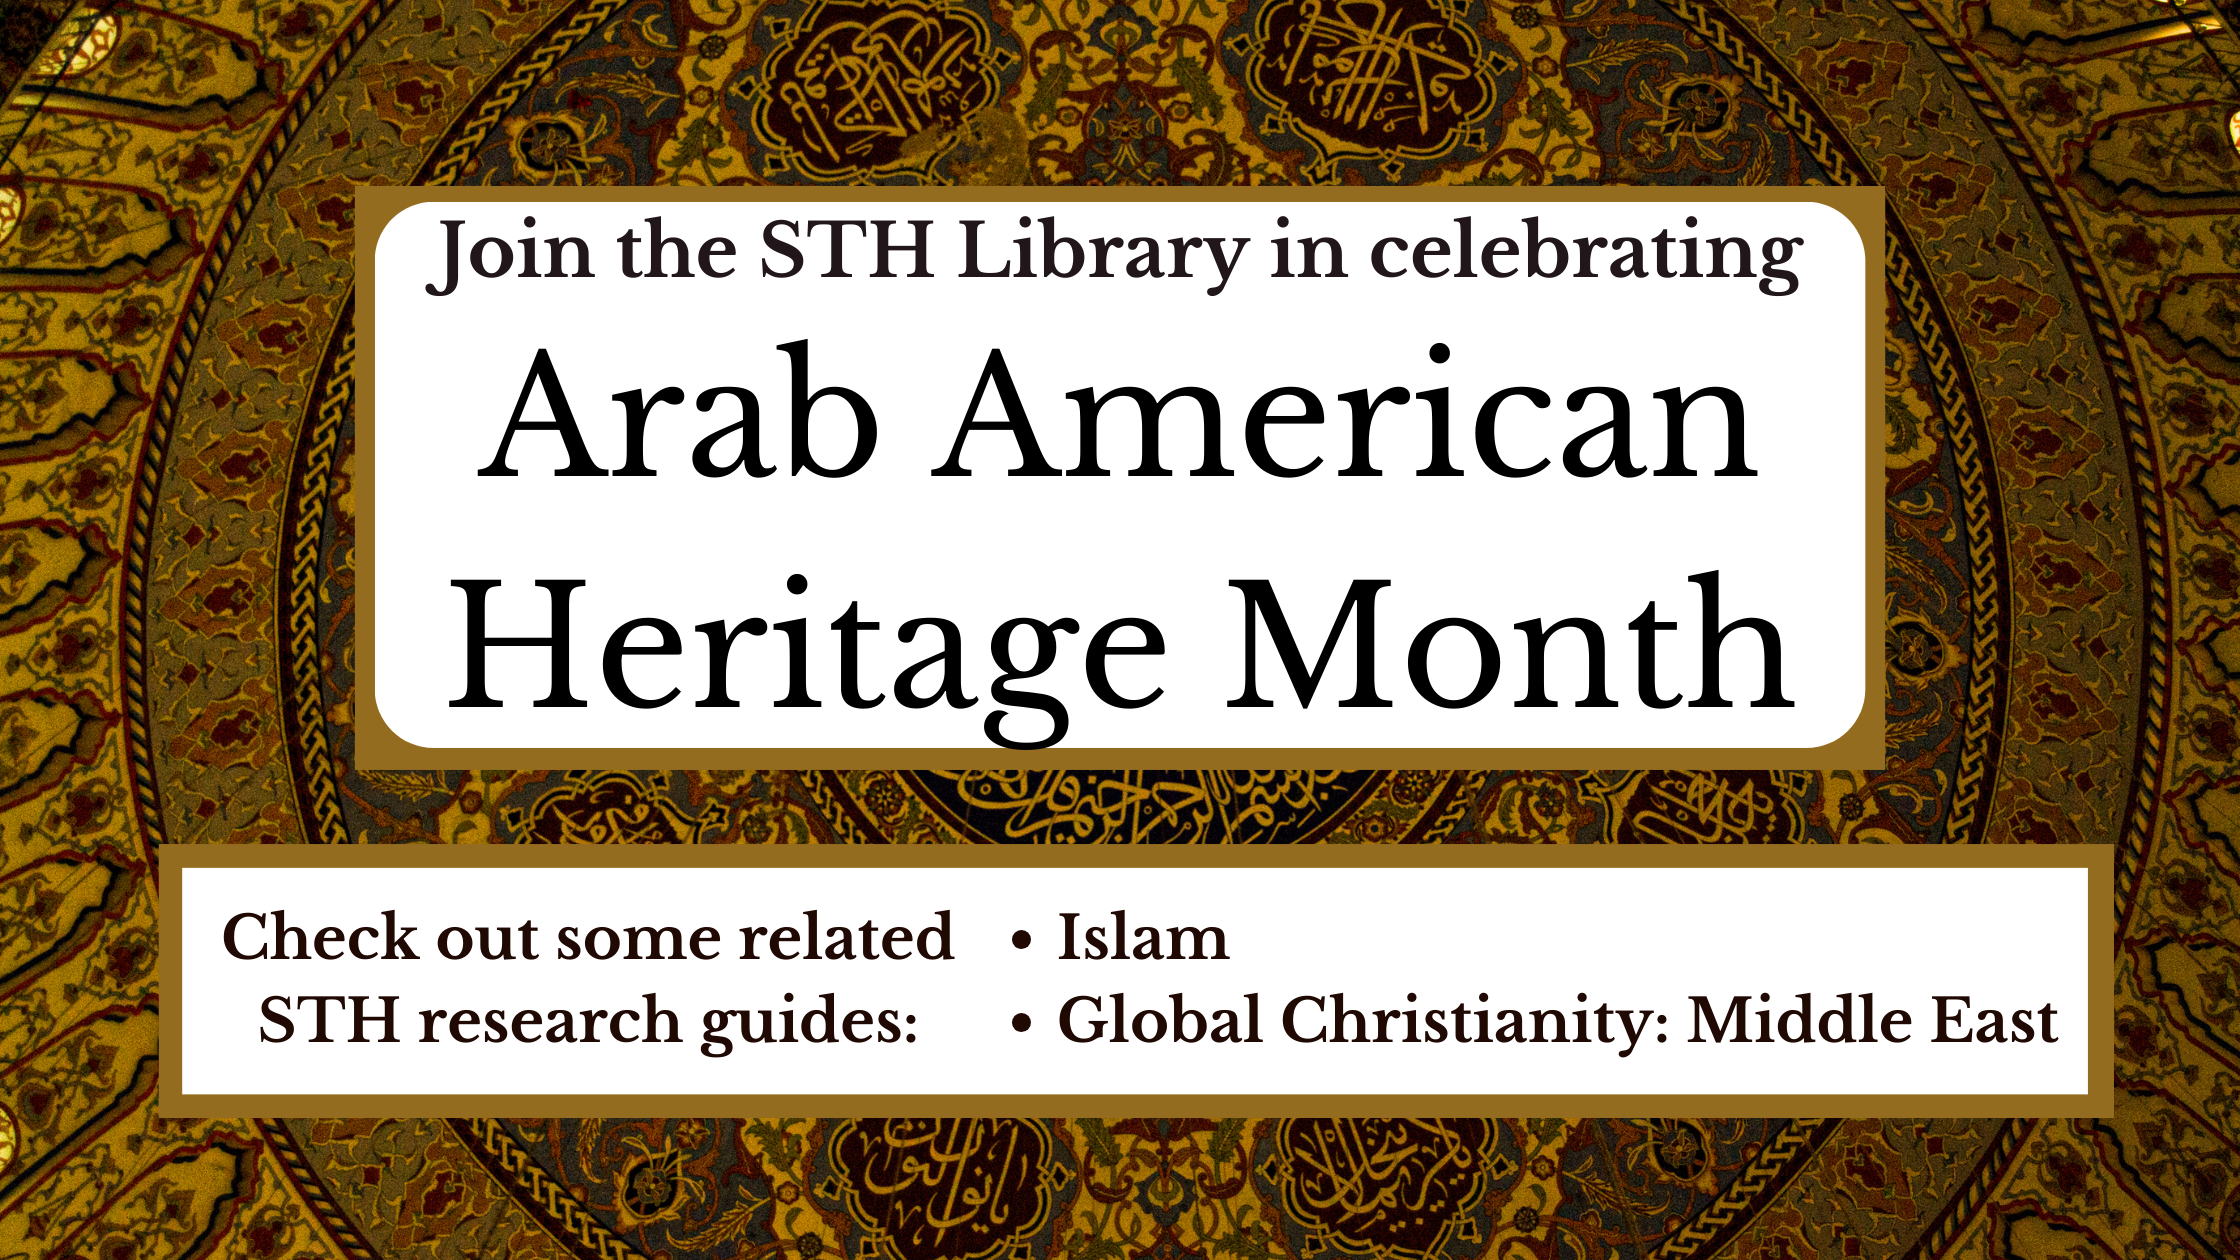 Join the STH Library in celebrating Arab American Heritage Month. Check out some related guides: Islam and Global Christianity: Middle East